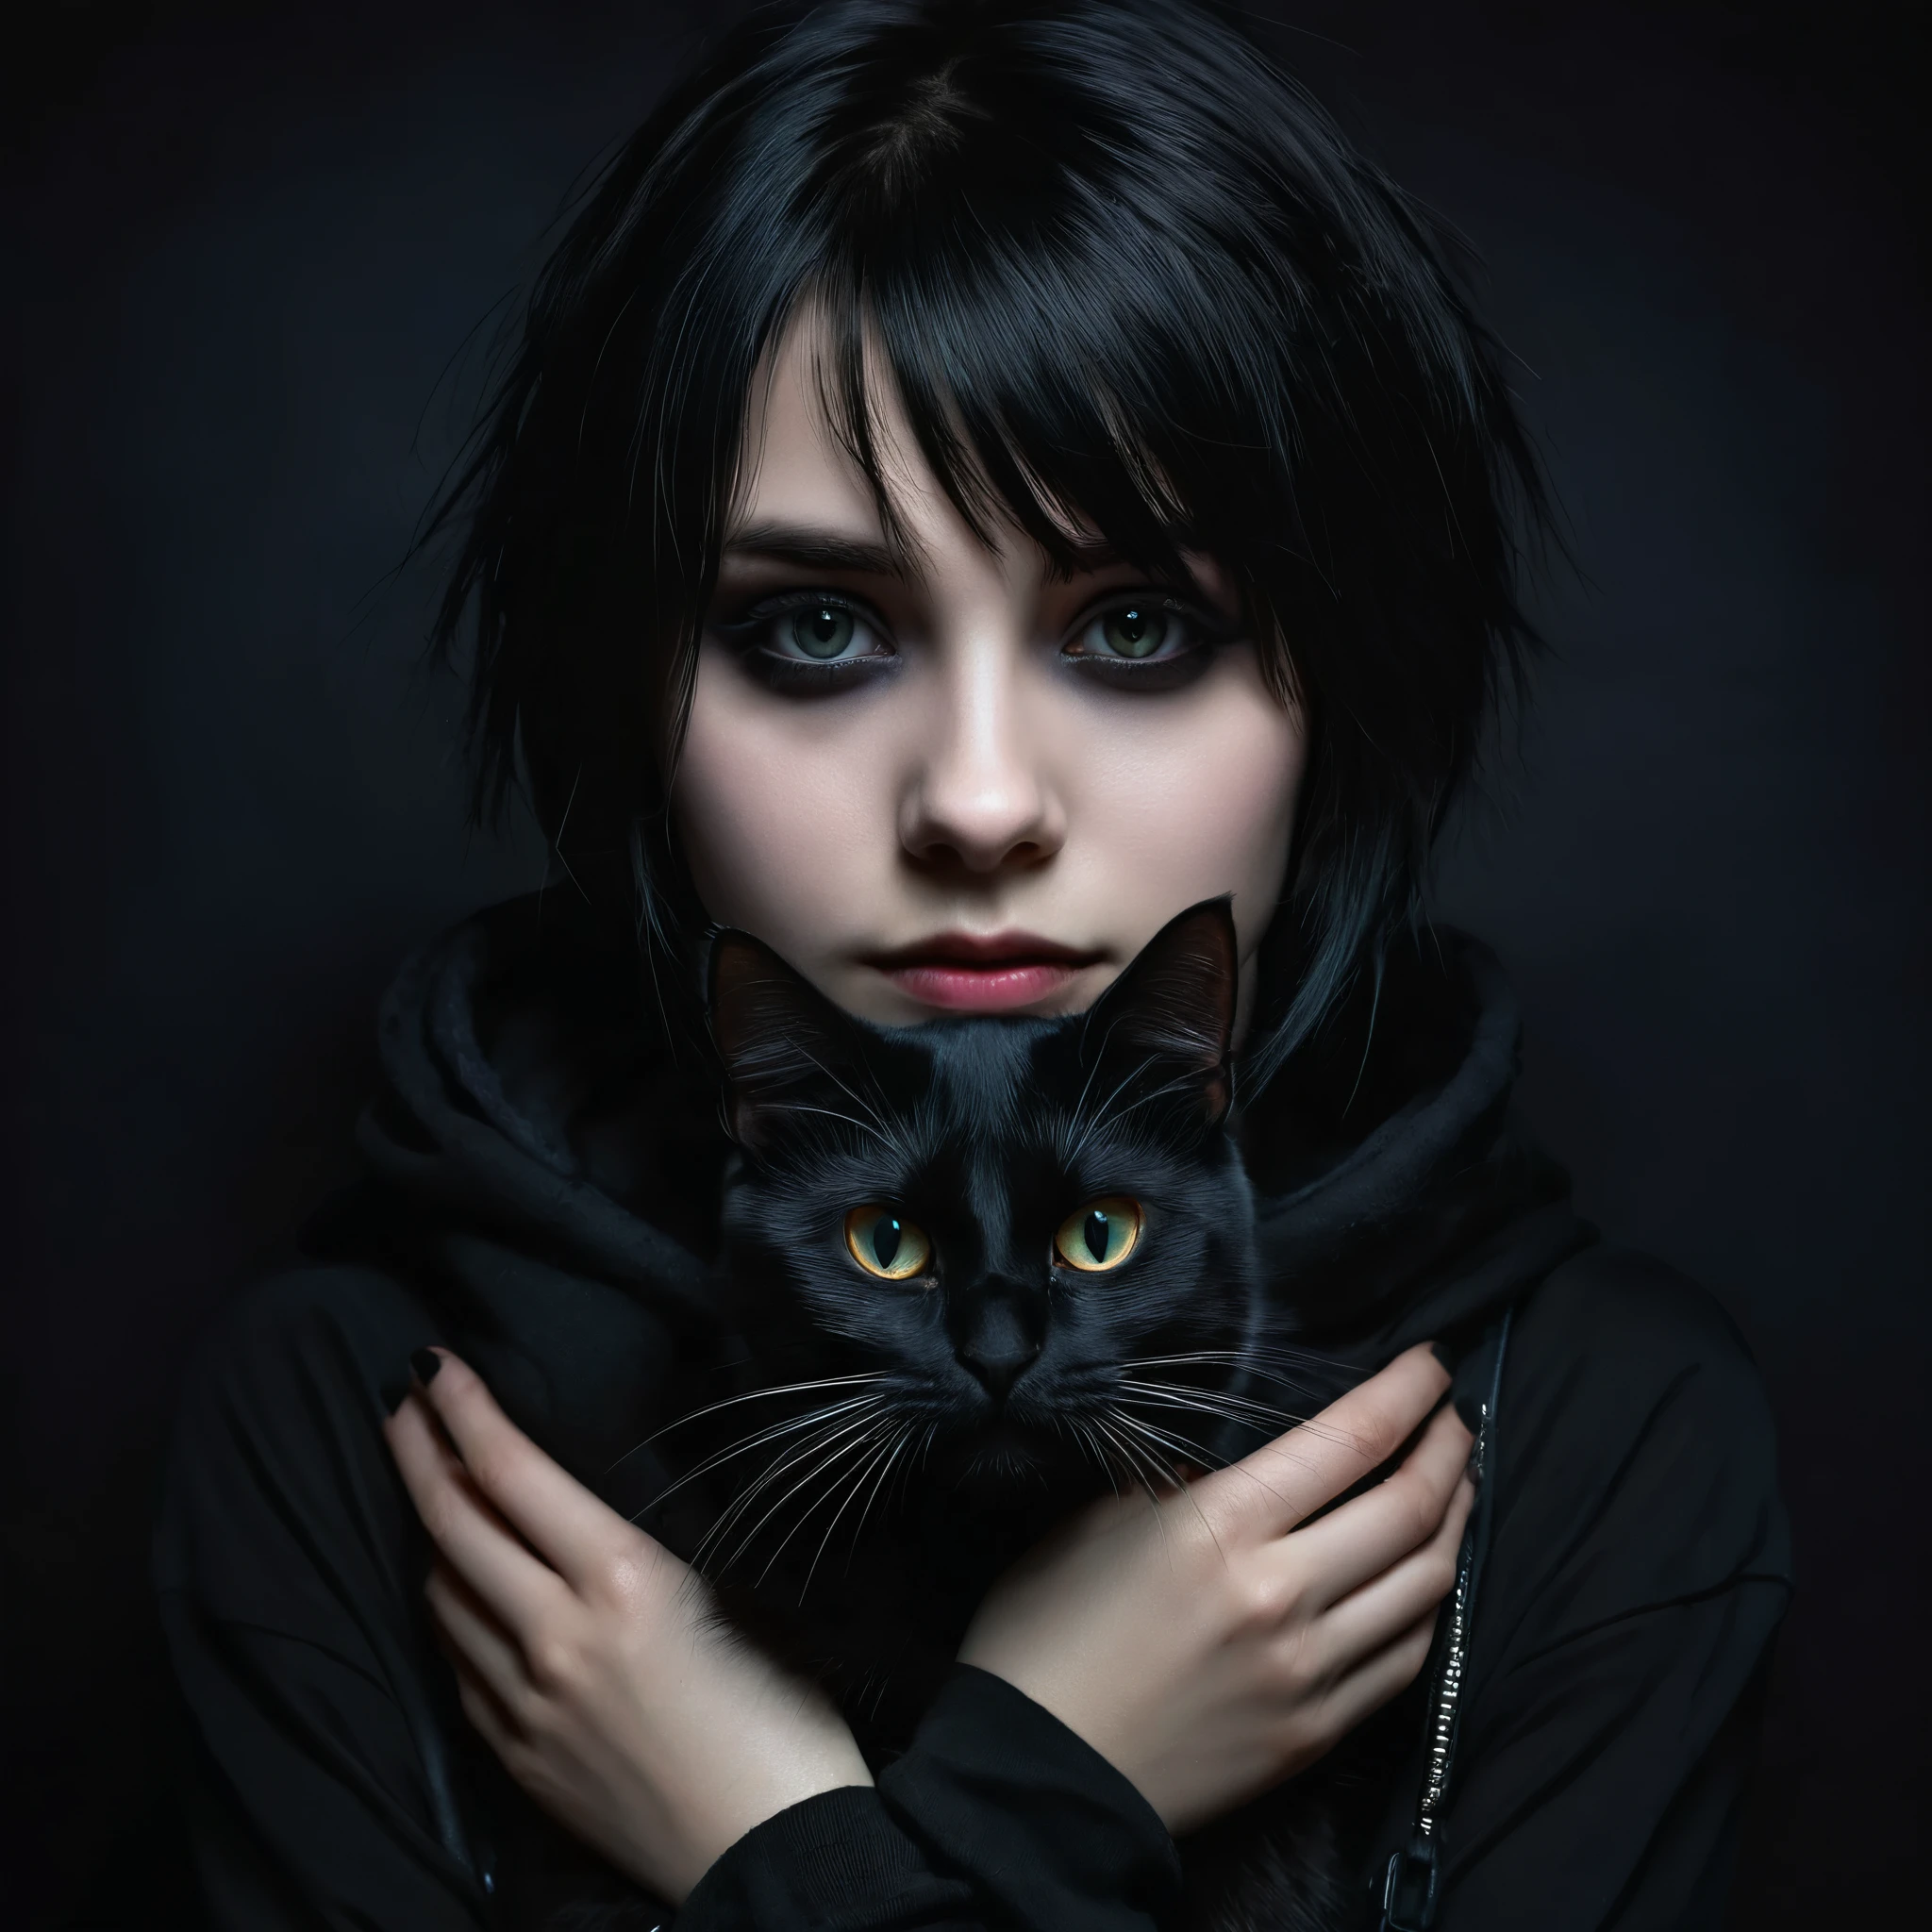 a emo girl with a black cat in her hands, detailed face, dark makeup, emotional expression, black clothing, dark background, chiaroscuro lighting, cinematic, dramatic, moody, digital painting